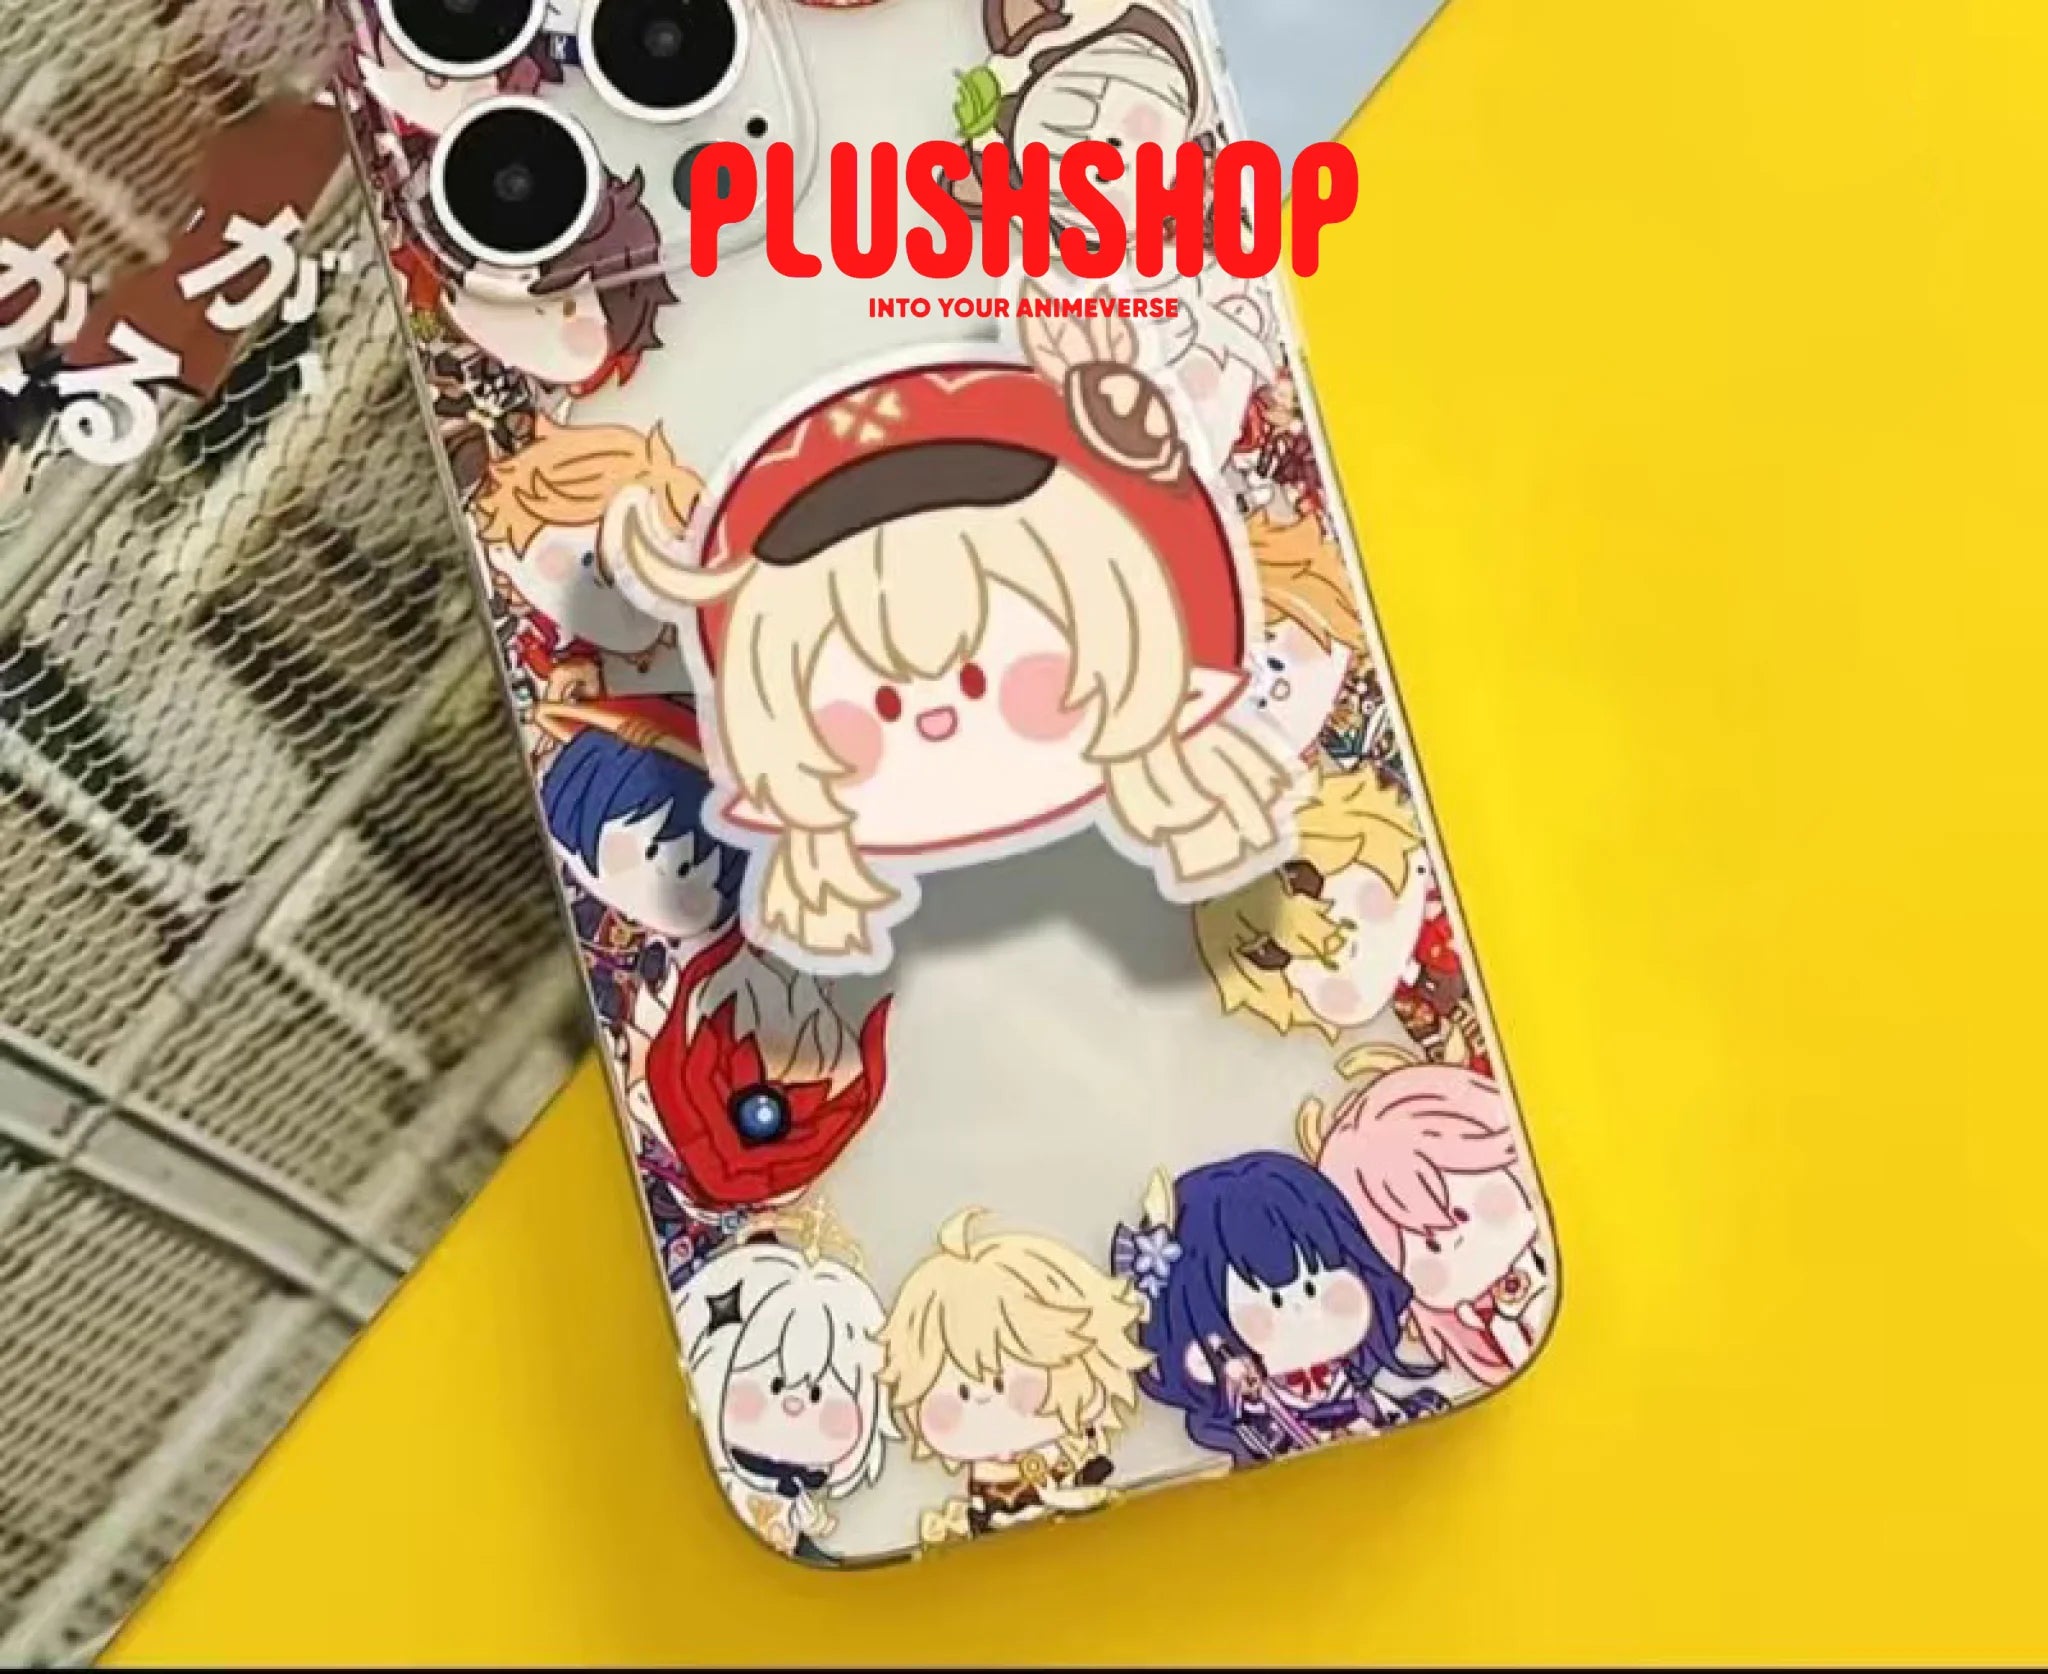 Genshin Impact Phone Grip Holder Cute Figure Stand For Fans Klee